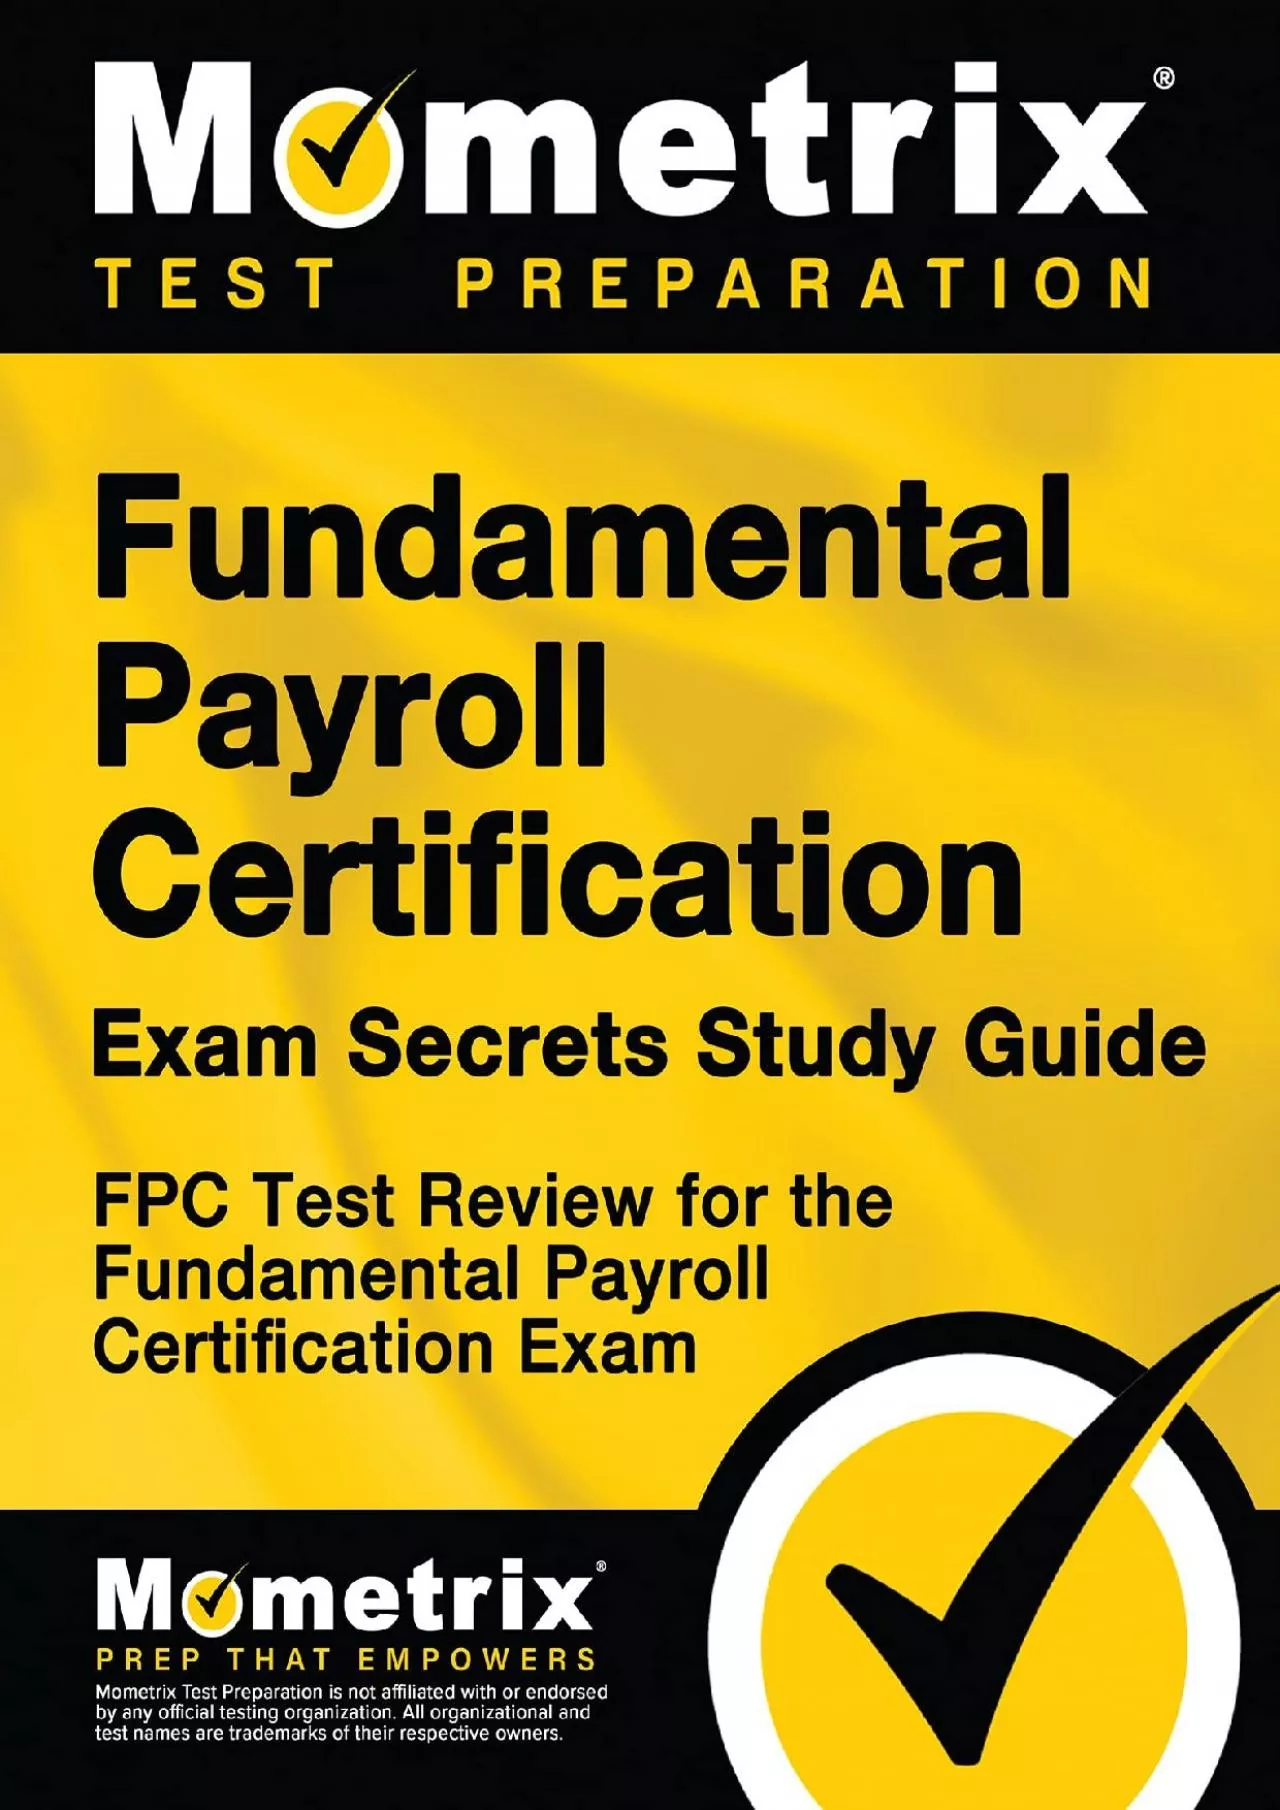 [EBOOK] Fundamental Payroll Certification Exam Secrets Study Guide: FPC Test Review for